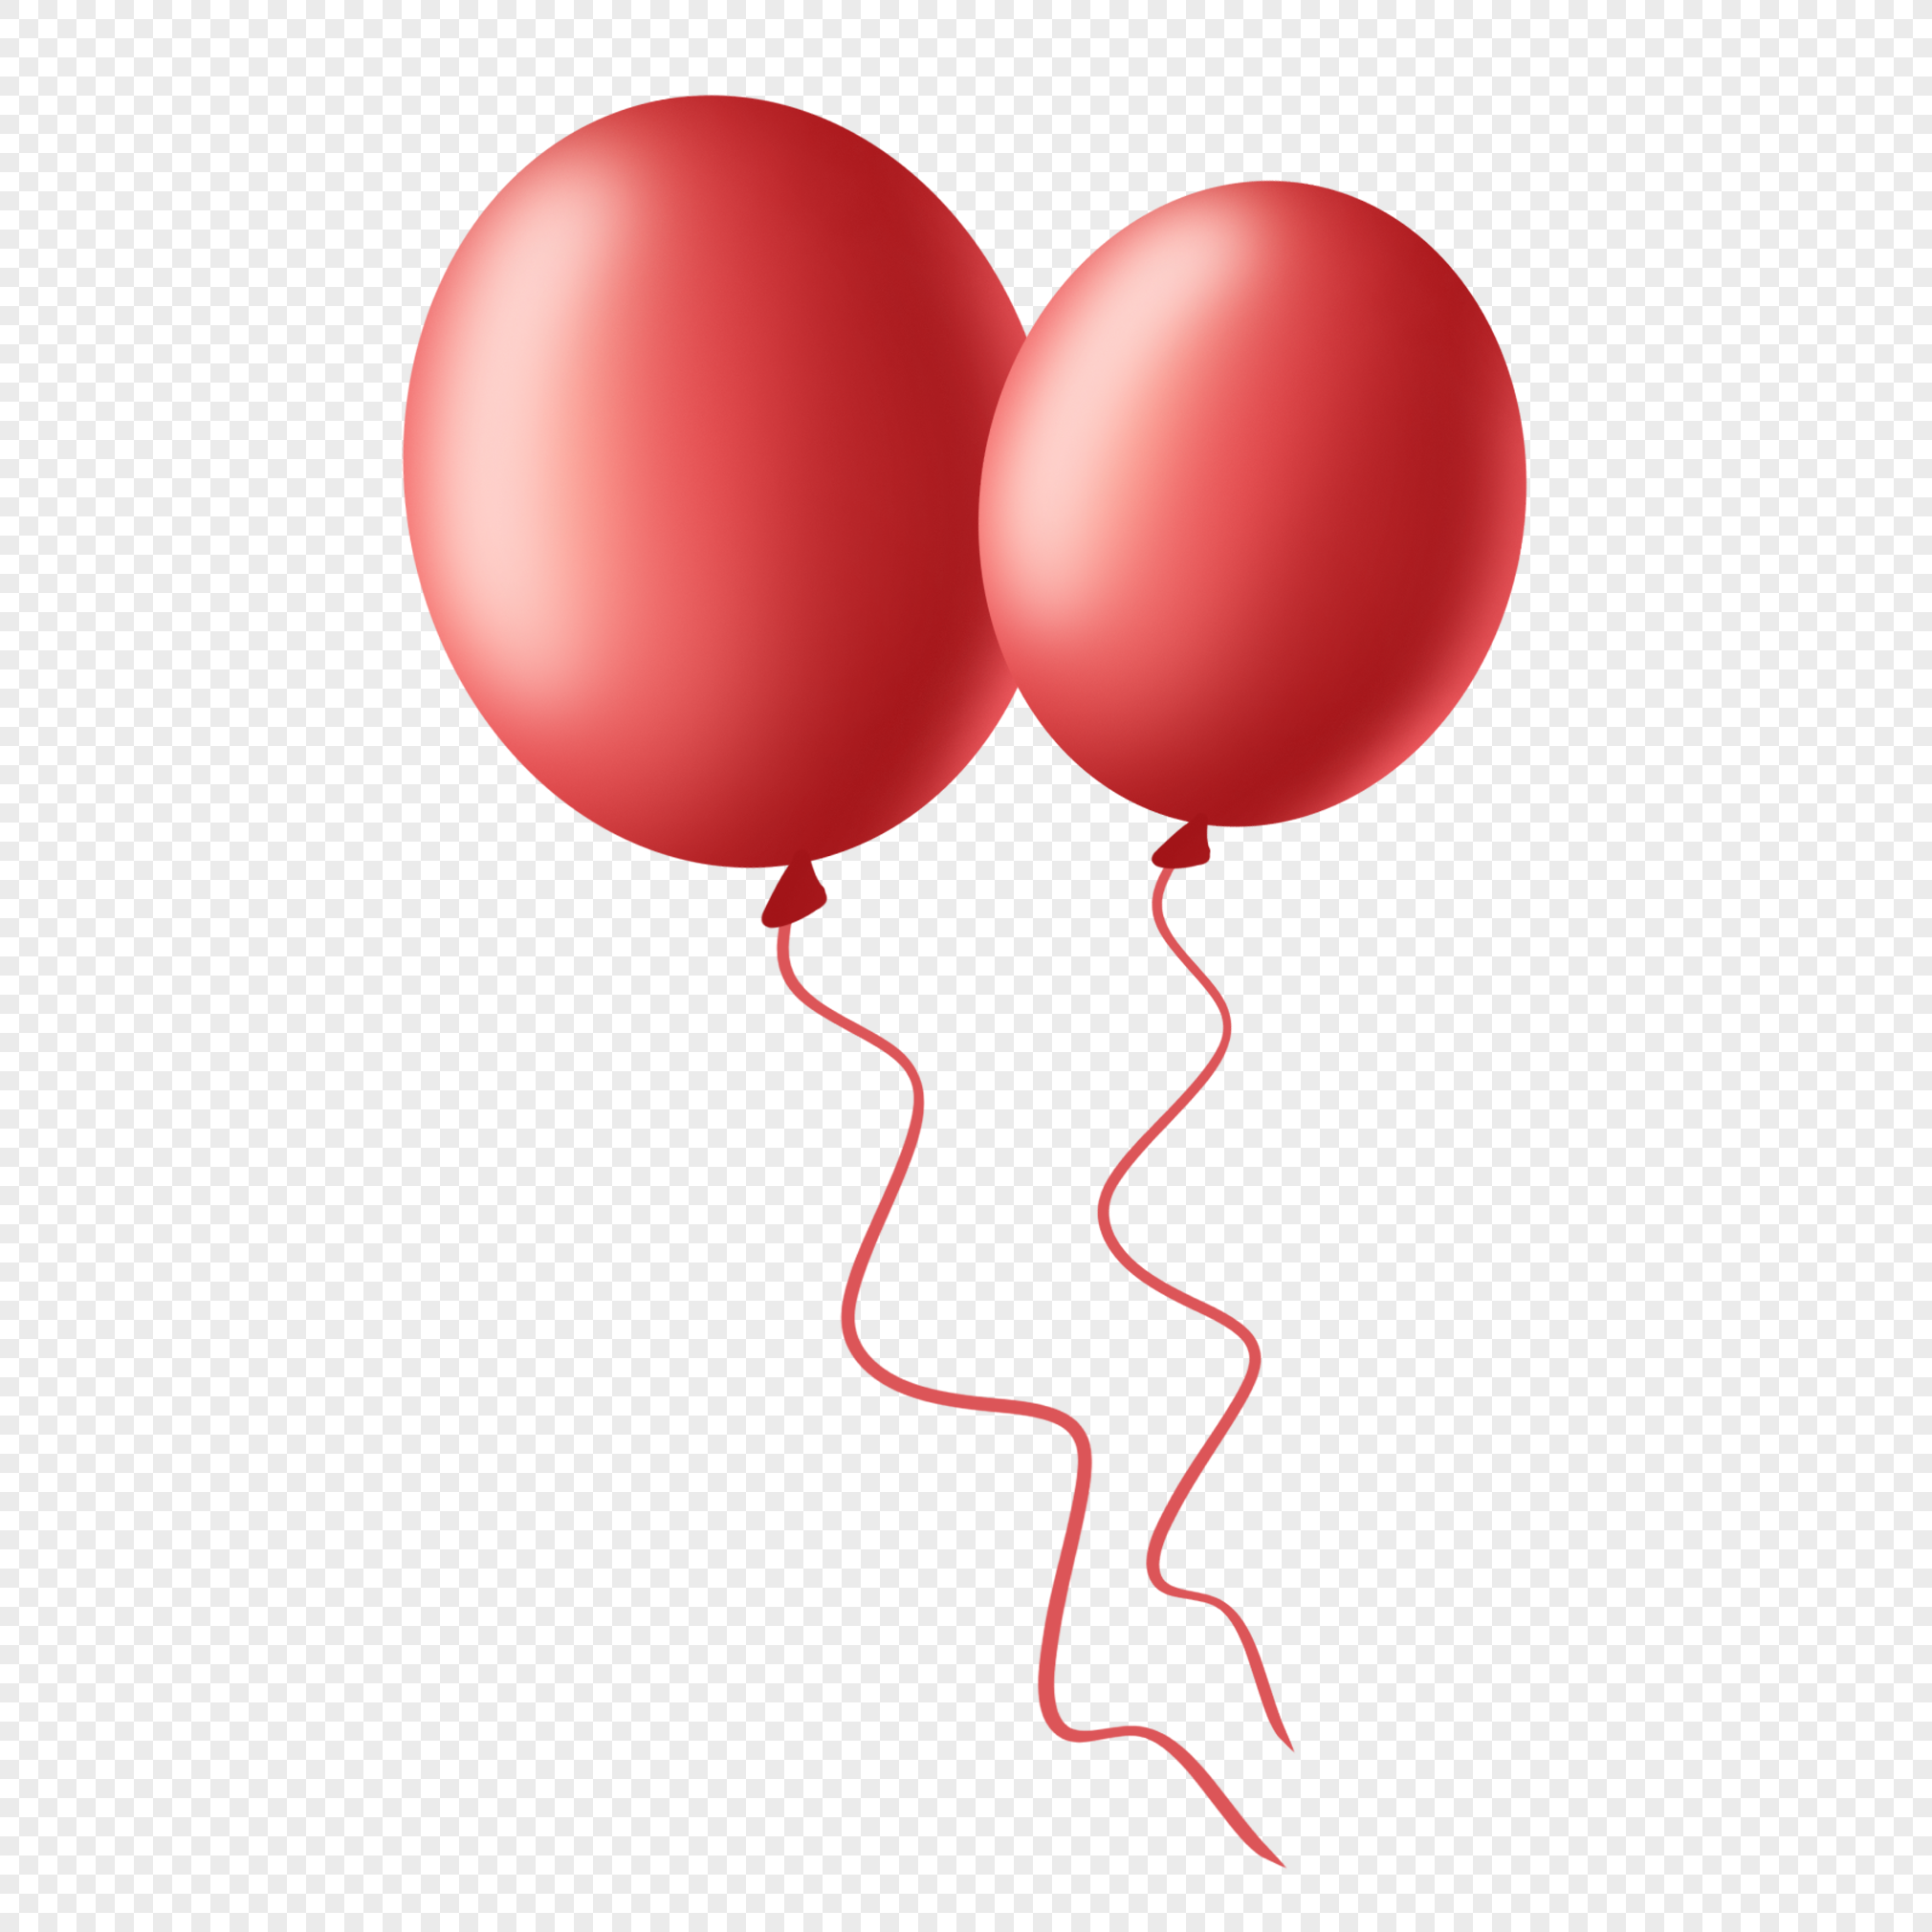 Balloons Strings Clipart Vector, National Day Festive Hand Painted Cartoon  Red Balloon String Material, National Day, Hand Drawn Balloons, Cartoon  Balloon PNG Image For Free Download